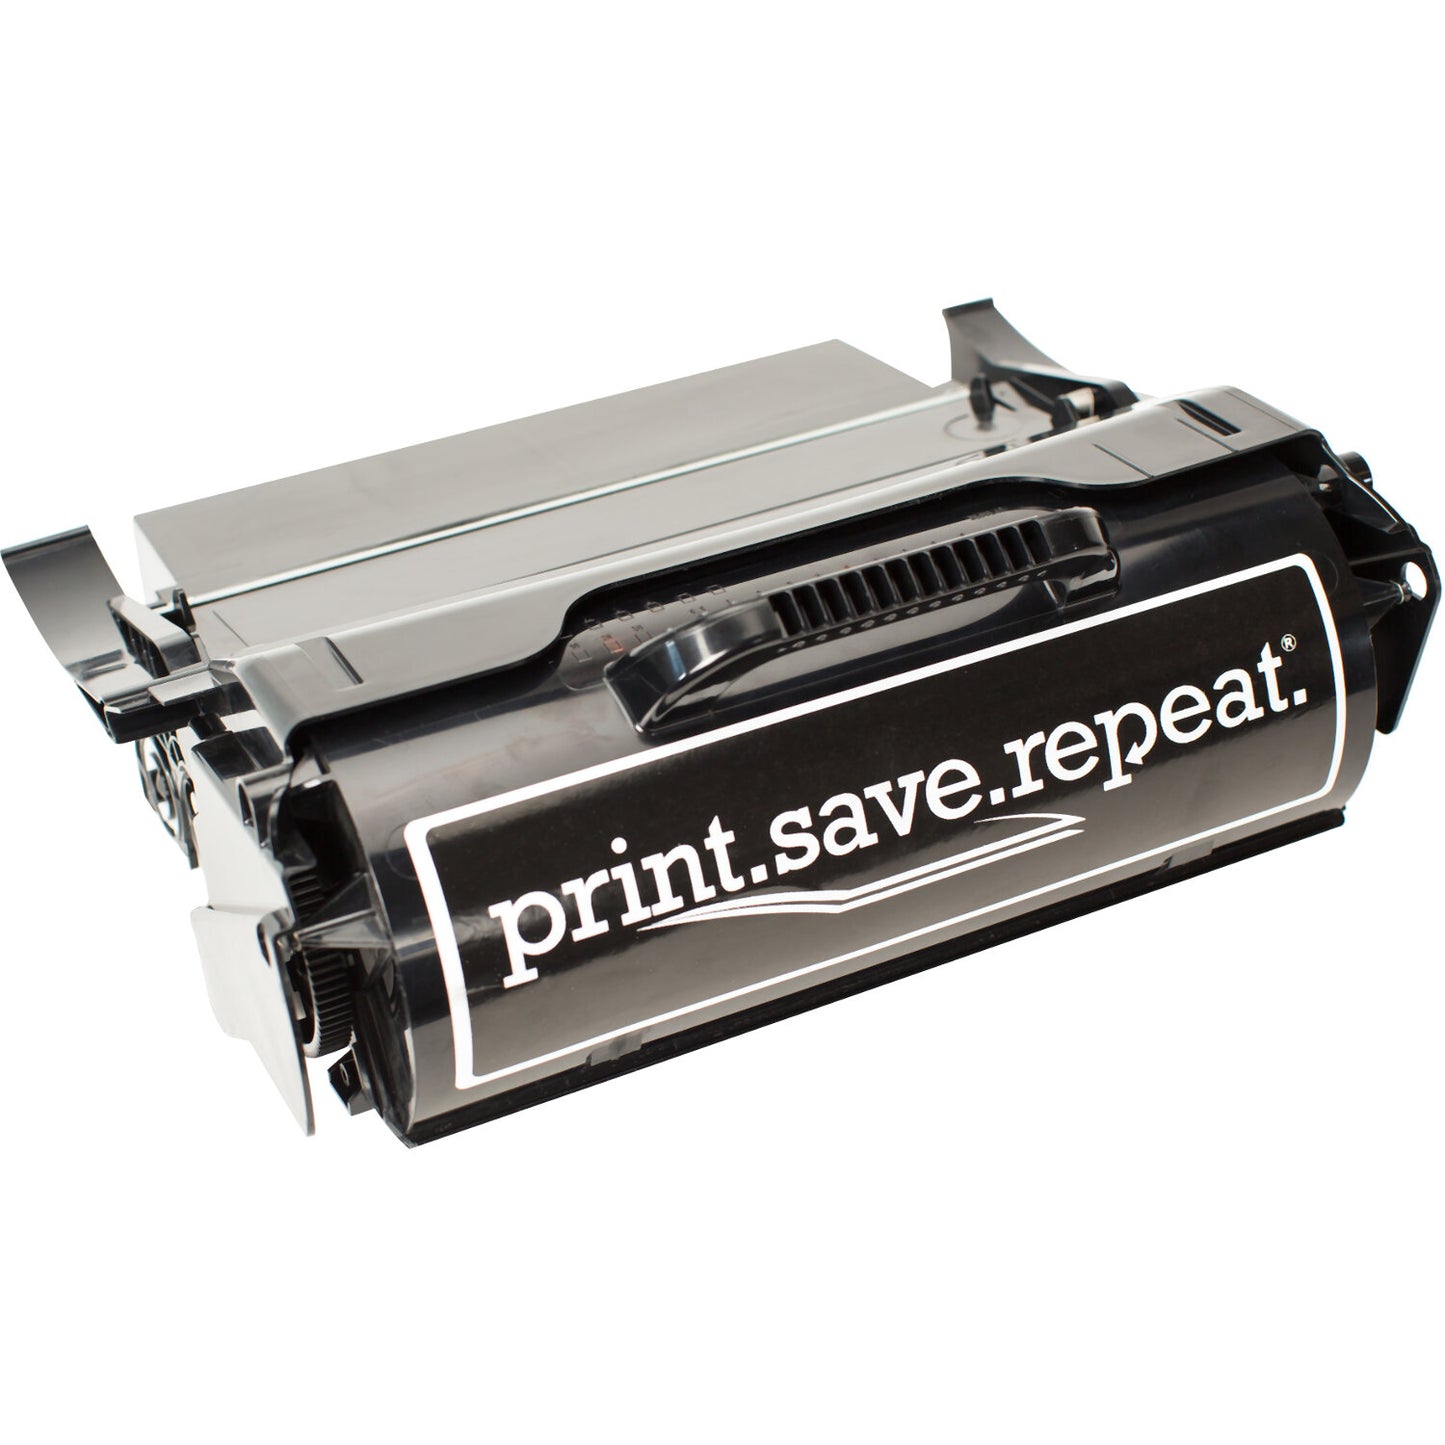 Print.Save.Repeat. Dell MPXDF Remanufactured Toner Cartridge for 5530, 5535 [7,000 Pages]